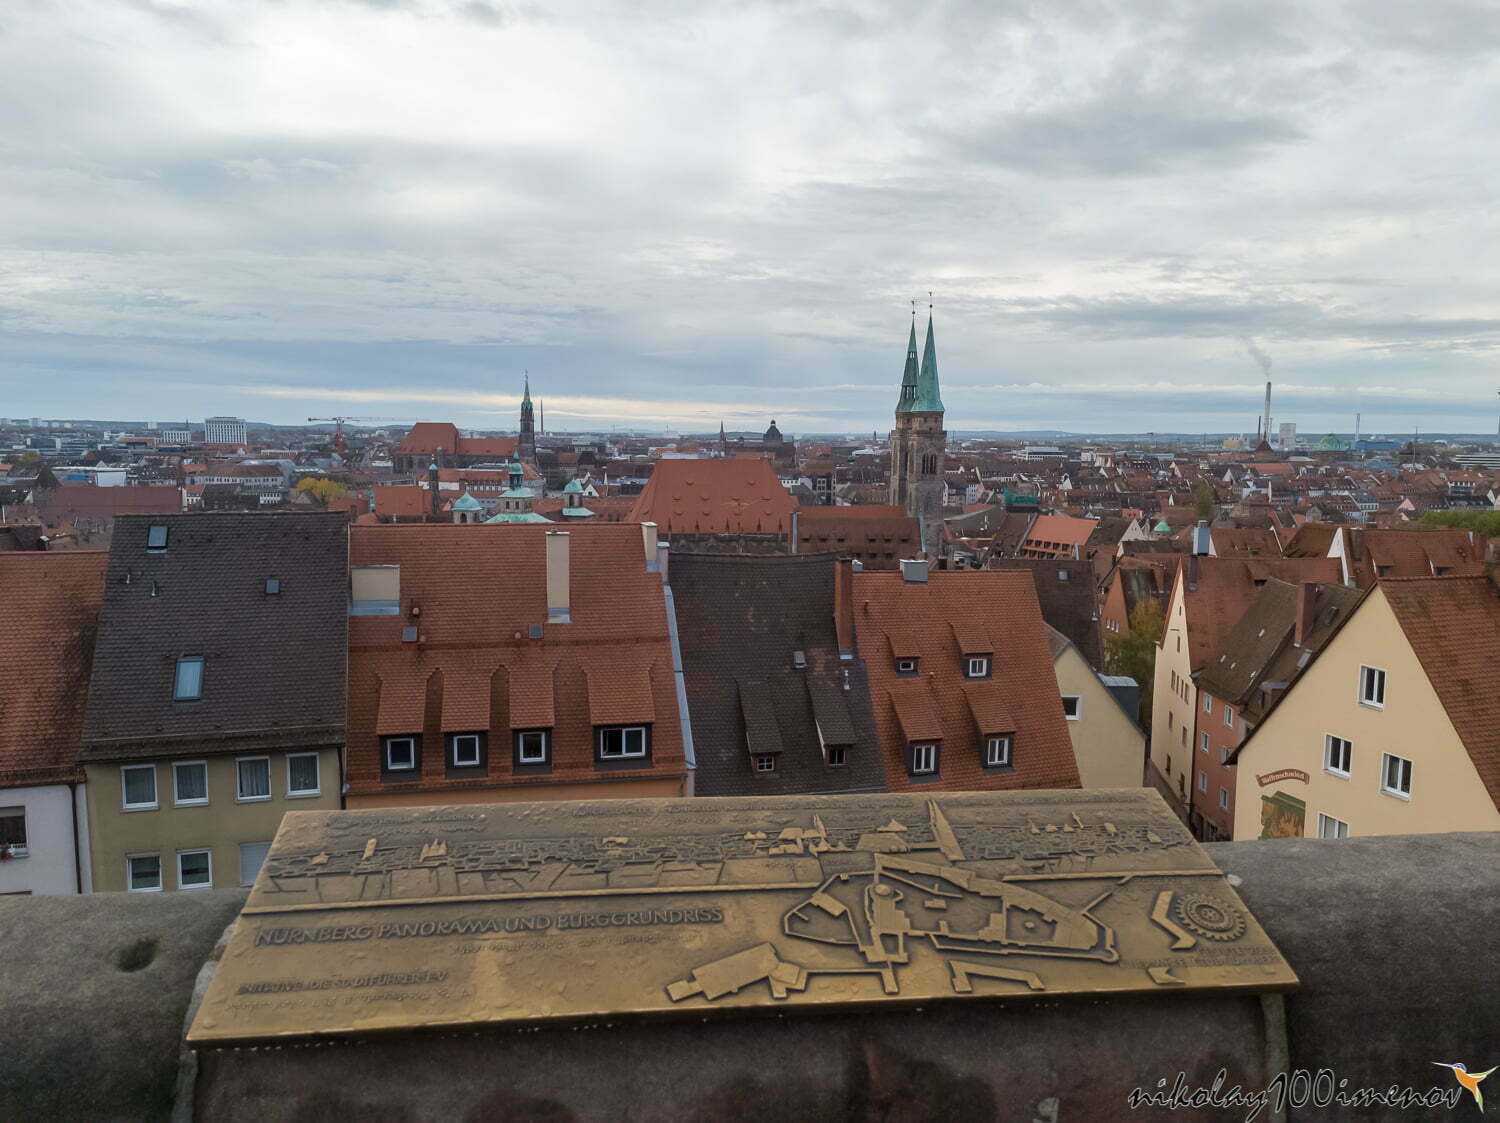 One day in Nuremberg